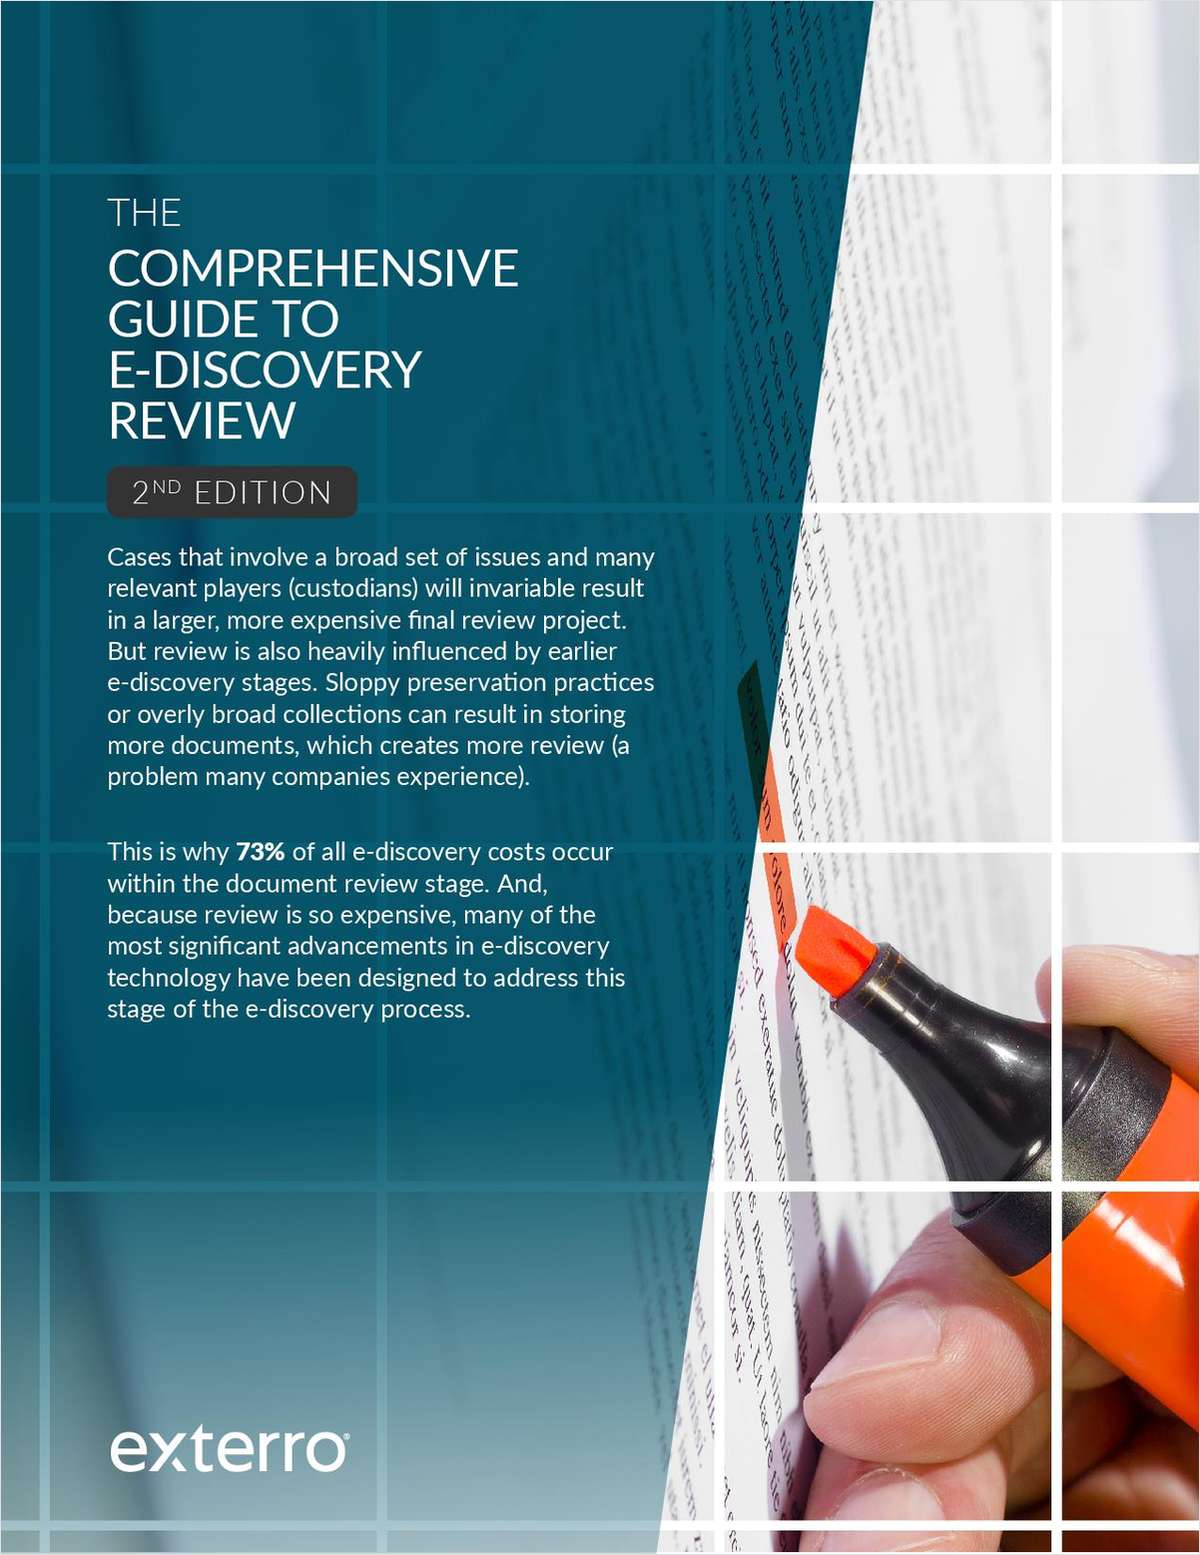 Document review is time consuming and demanding of resources, and legal professionals are usually ill-equipped to handle the process. Master the basics of e-discovery review with tips, best practices, and case law reviews in this updated guidebook.